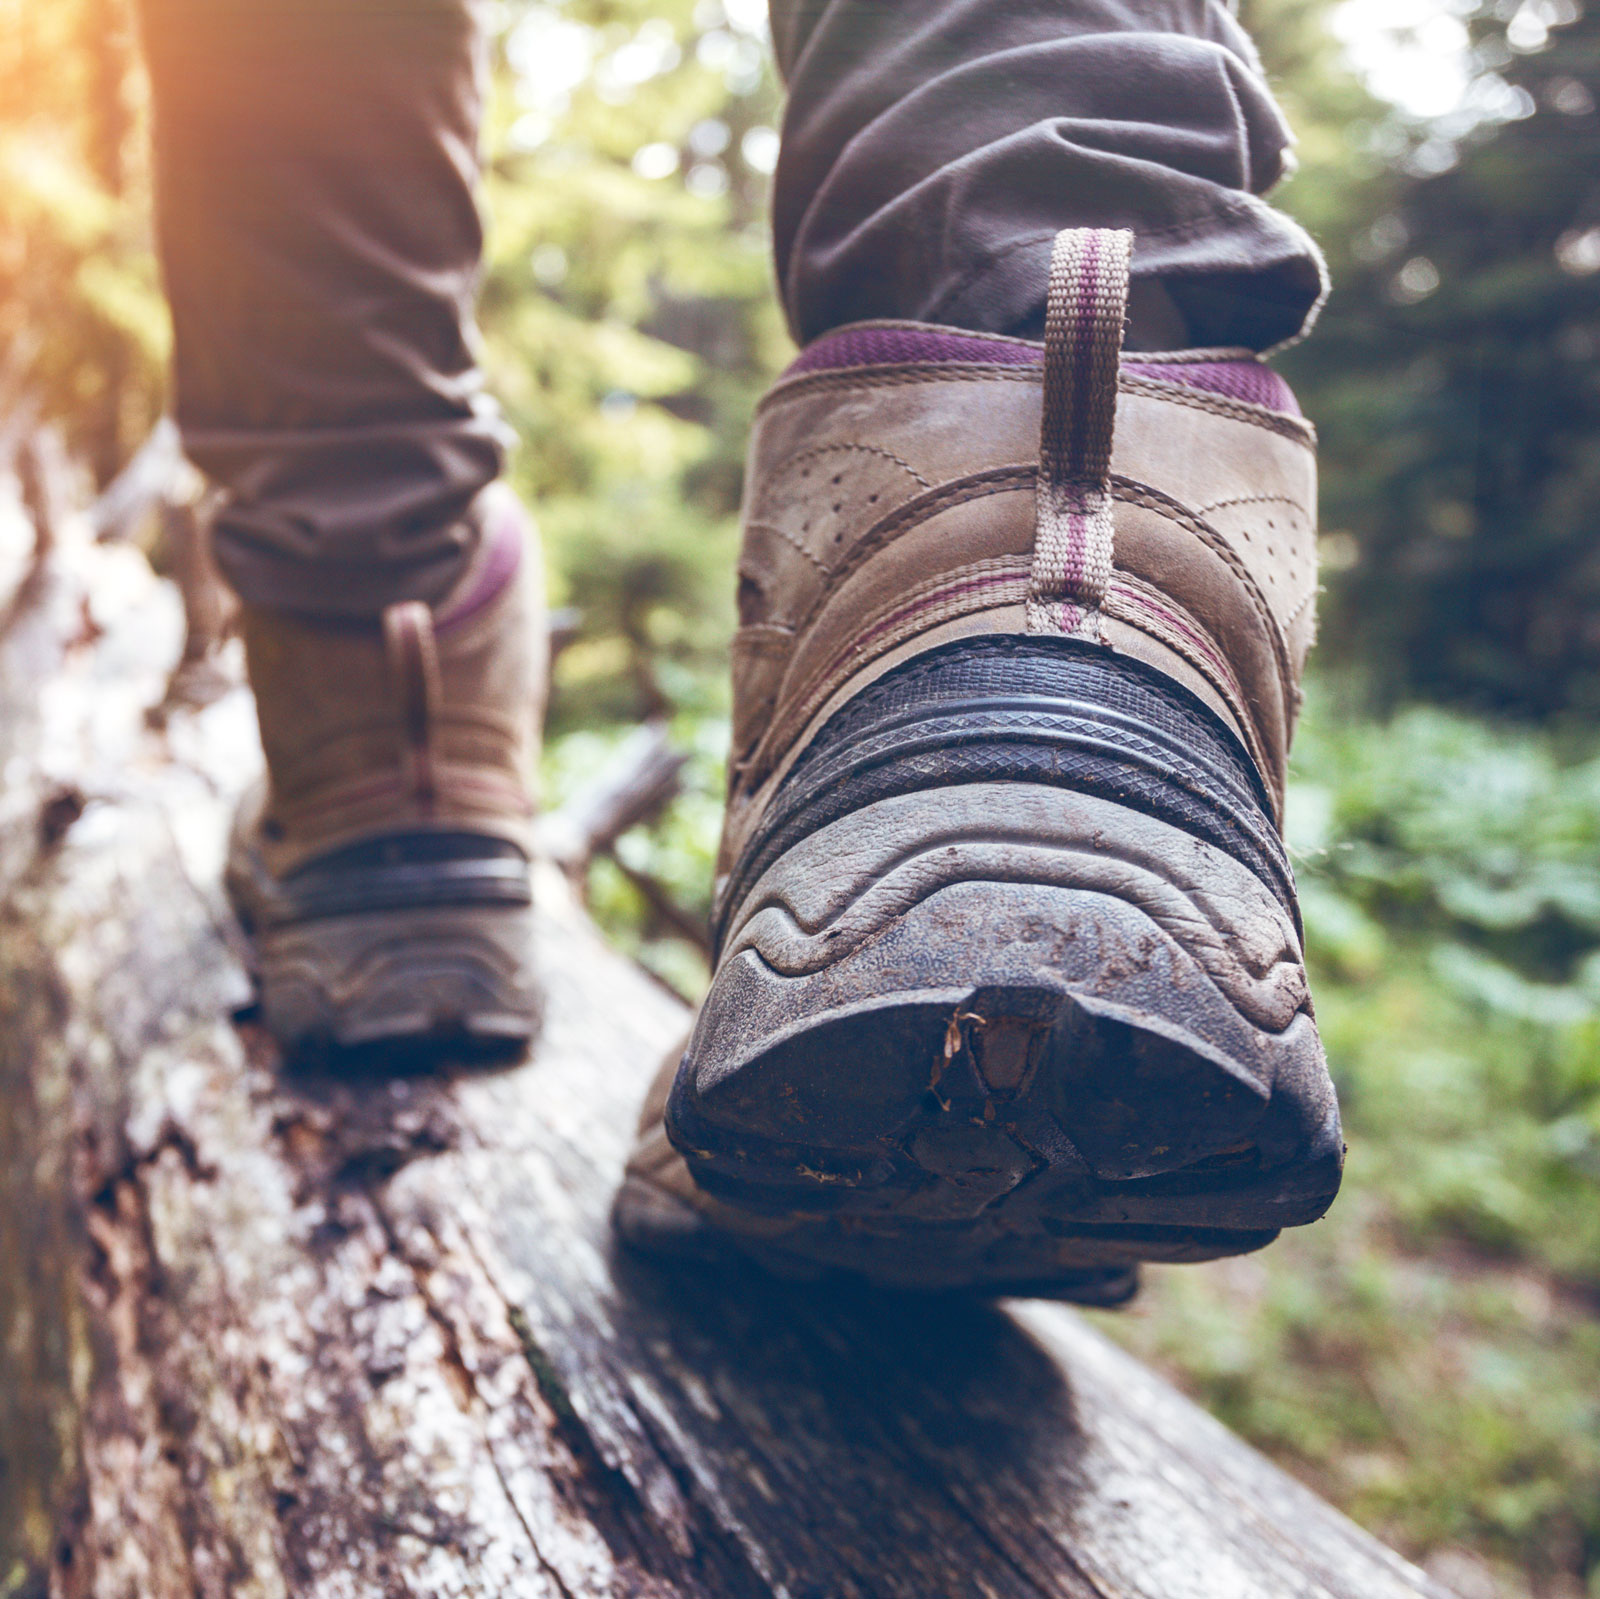 Hiking boots - walking on a log